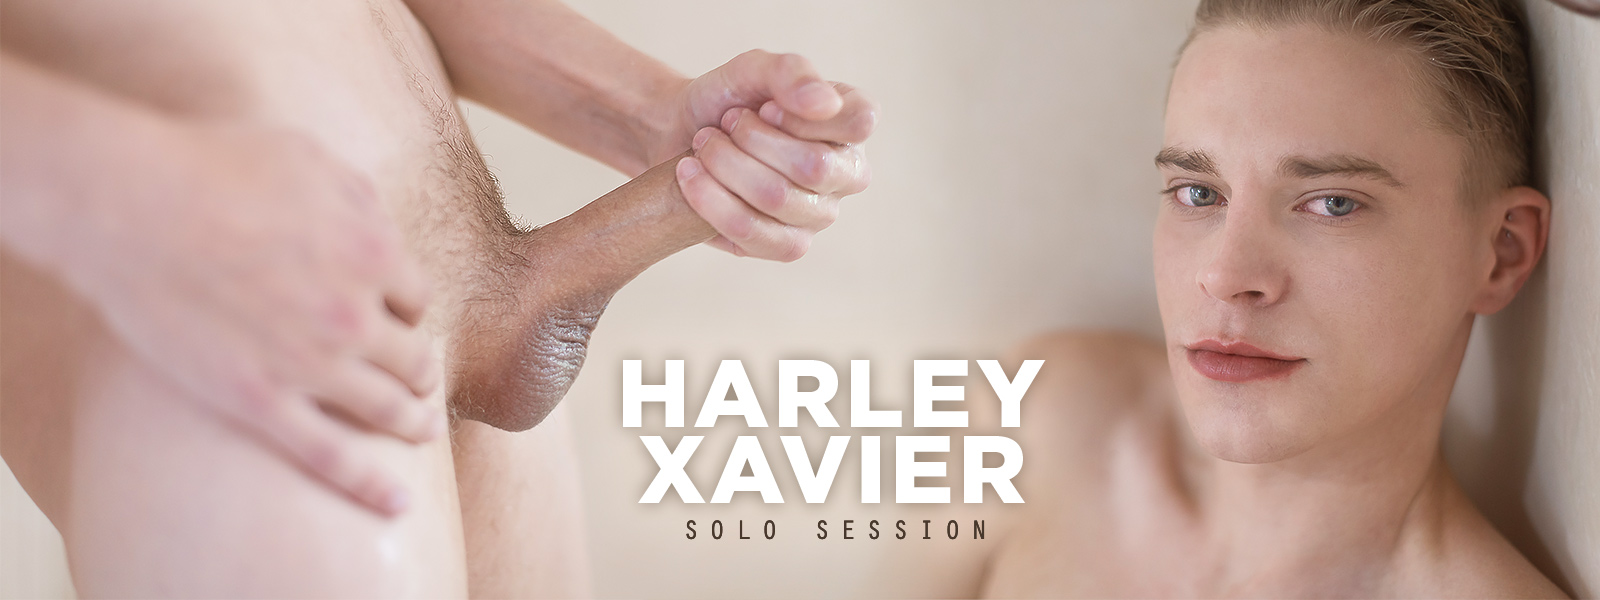 Harley Xavier stroking his giant cock in this scene.